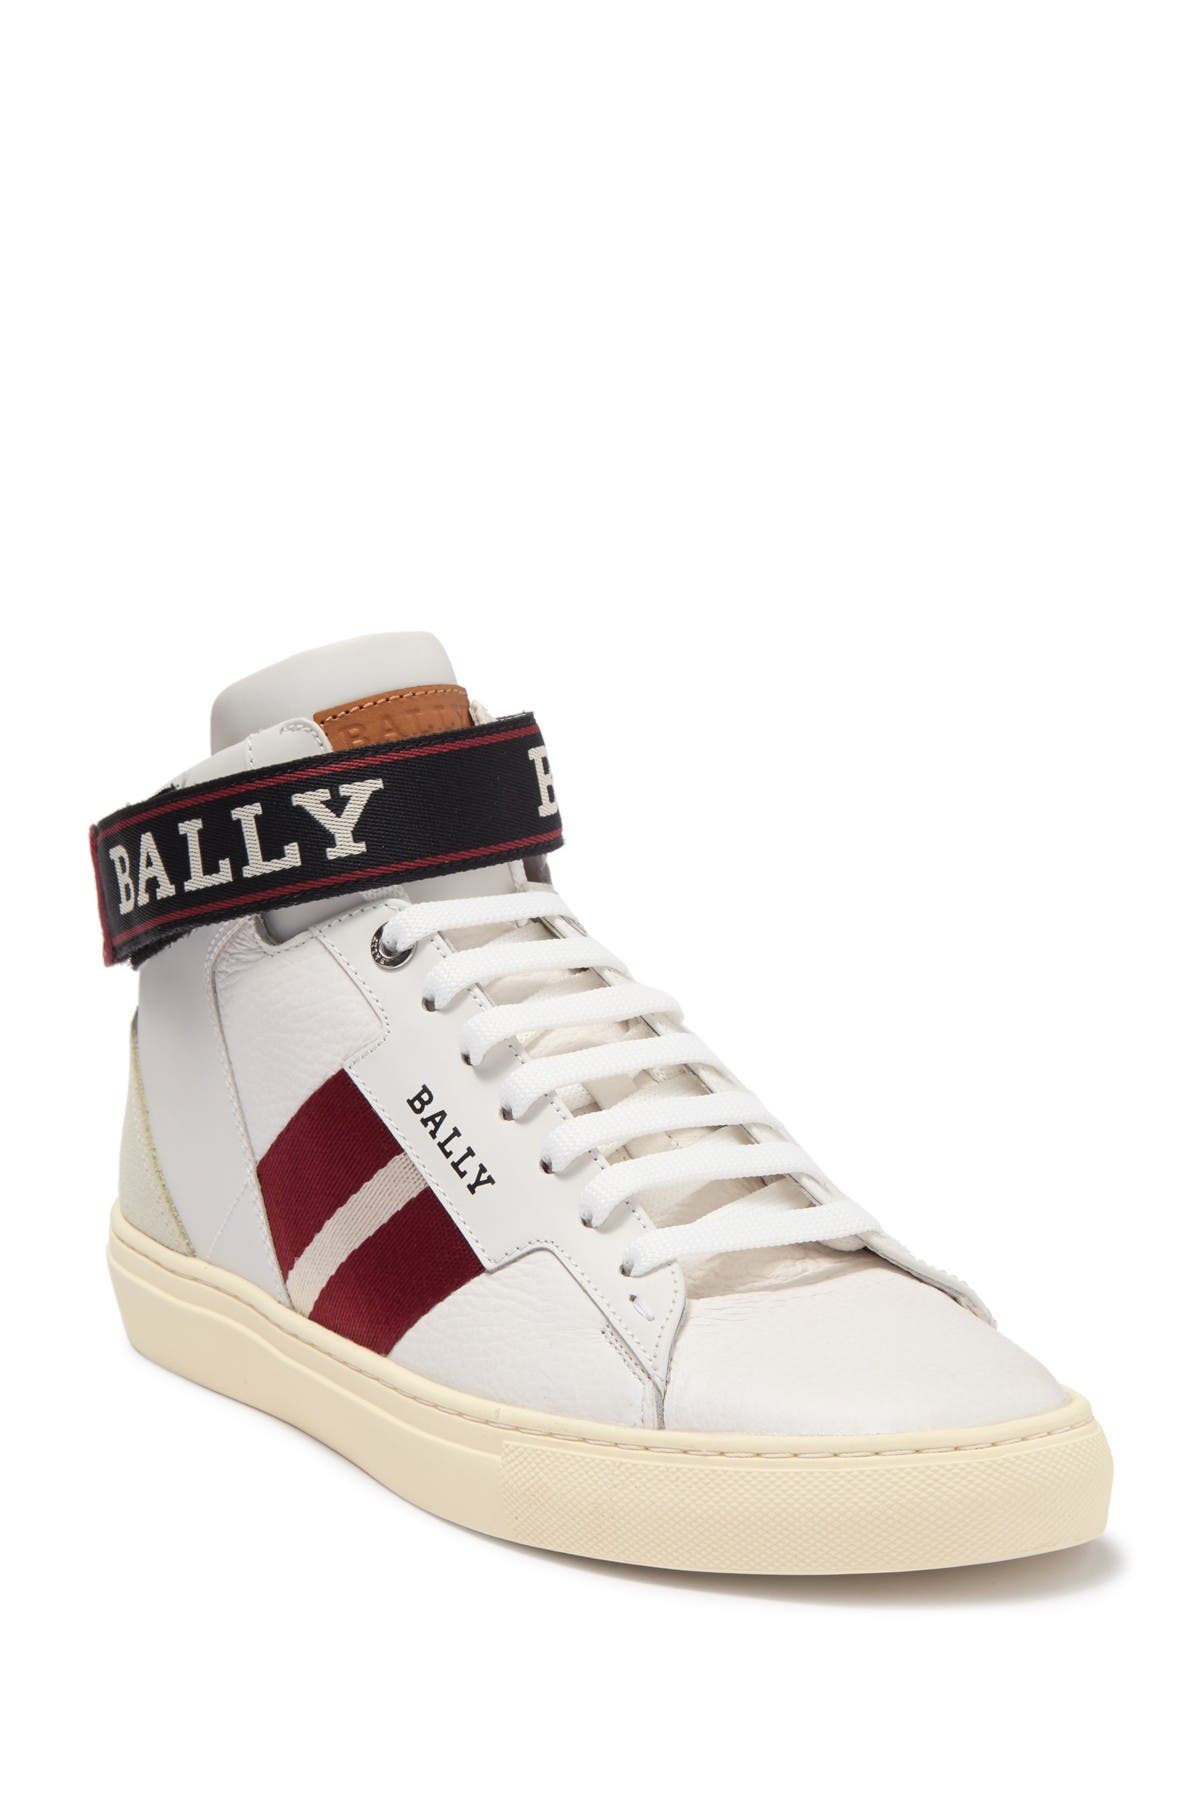 BALLY | Heros Leather High Top Sneaker 